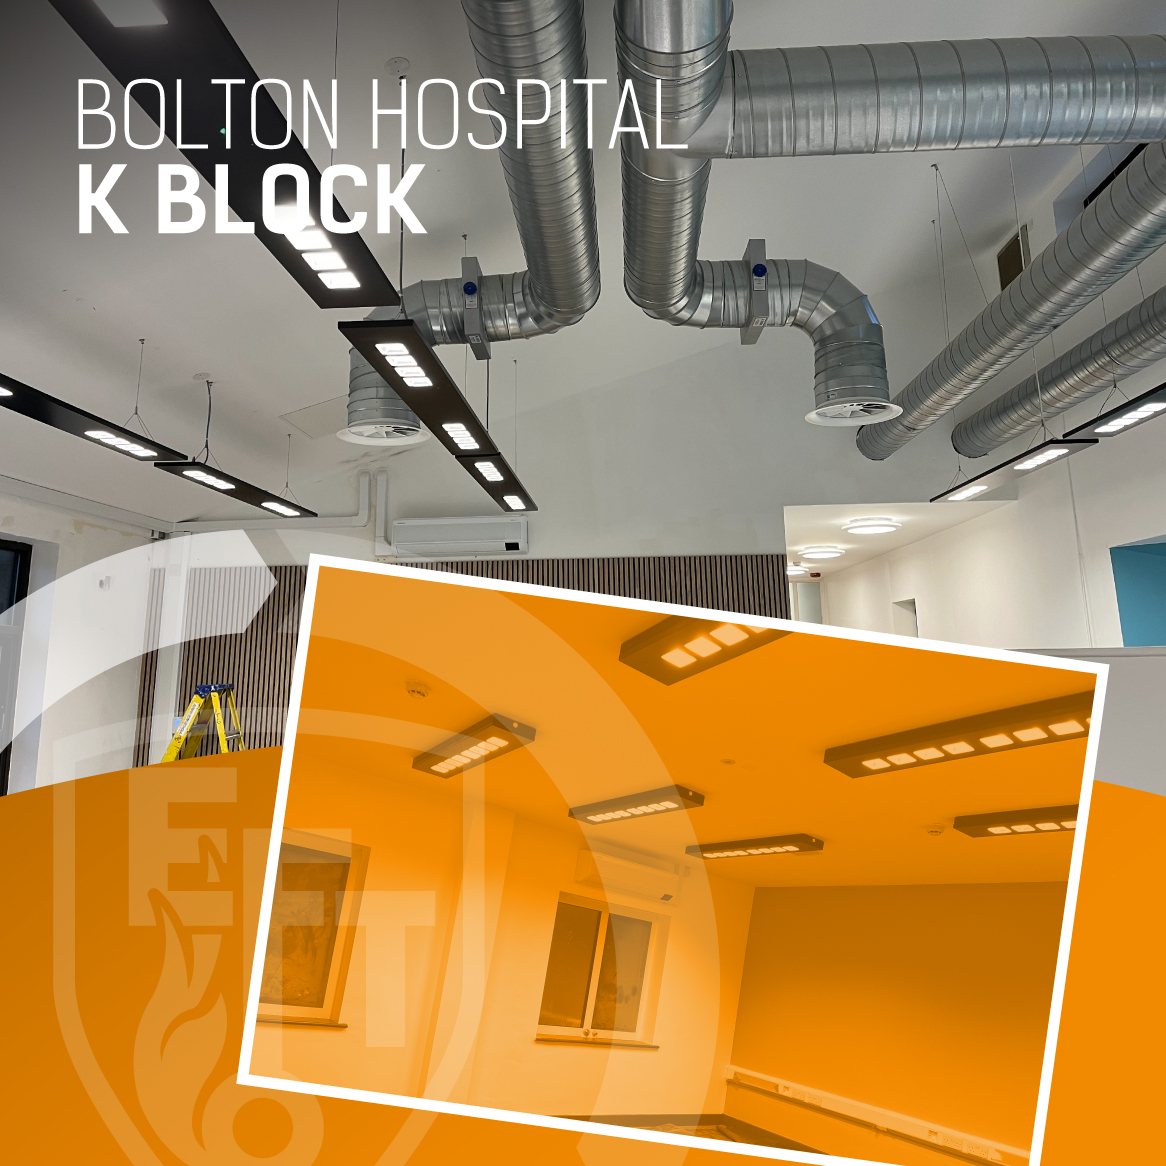 Project completed at Bolton Hospital